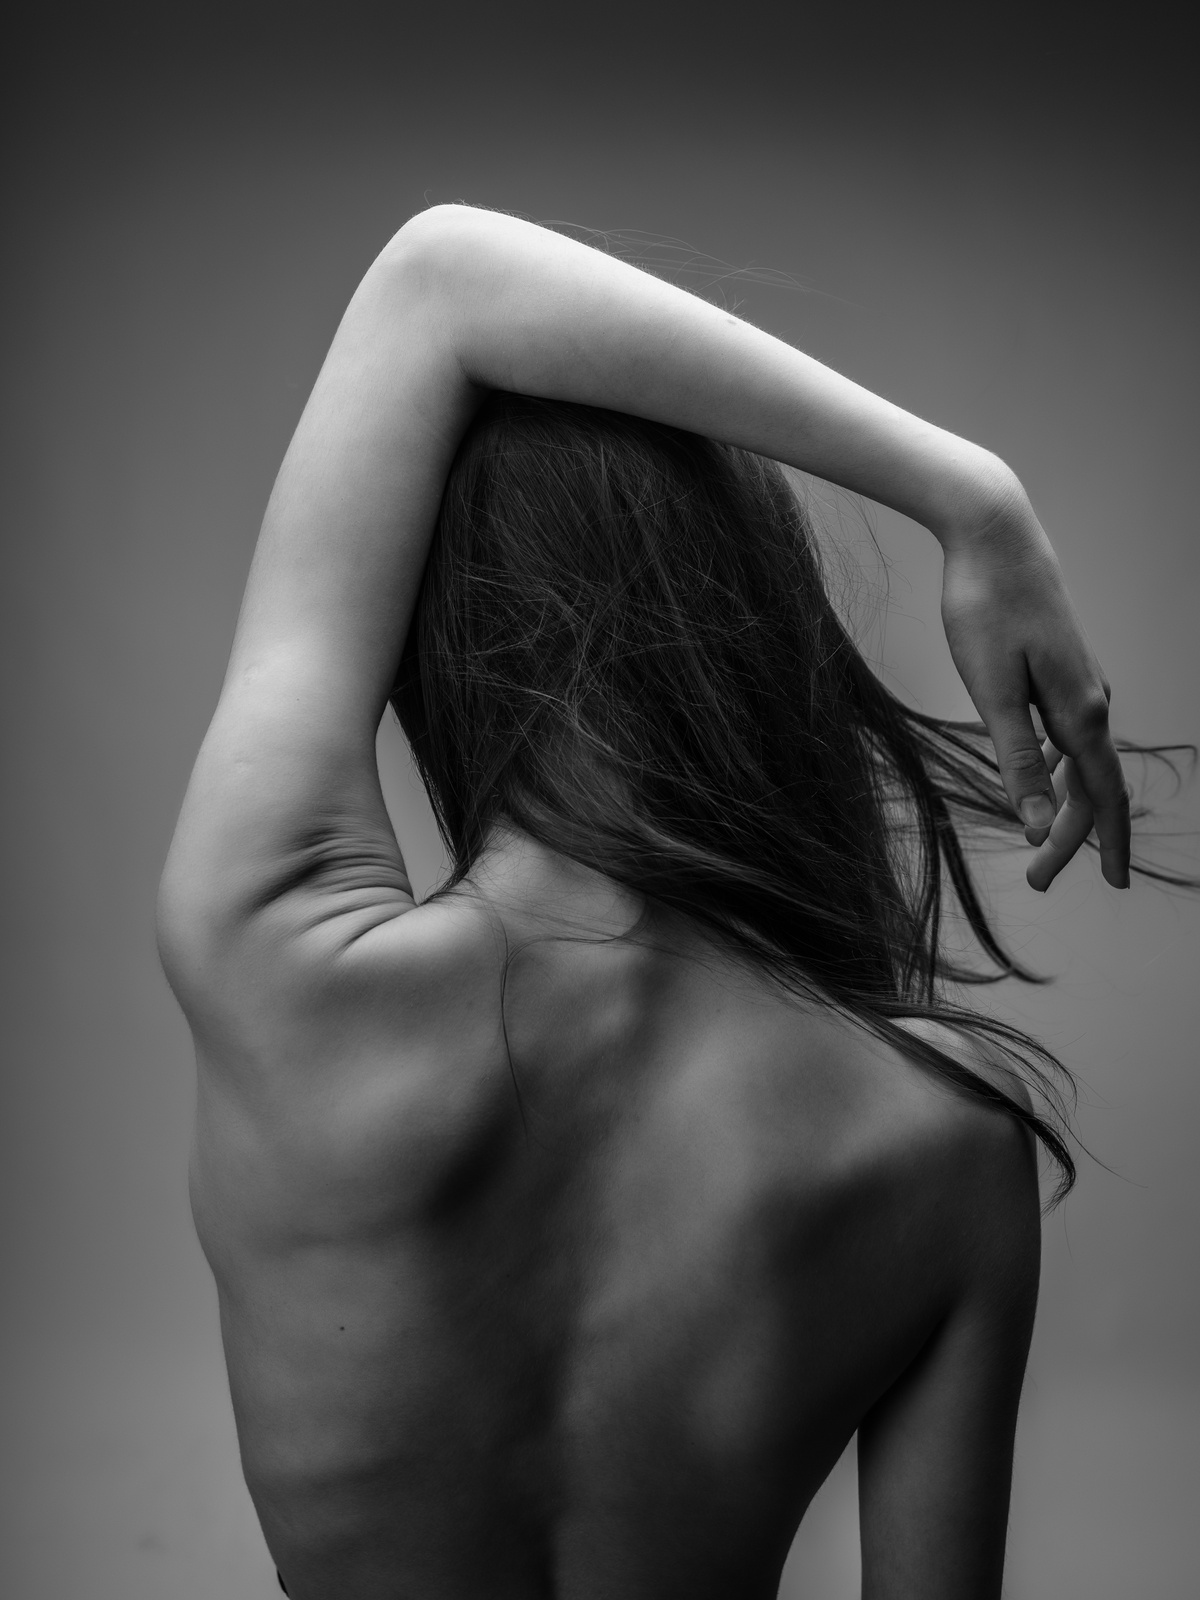 Back of a Woman Naked Body Posing Black and White Photo